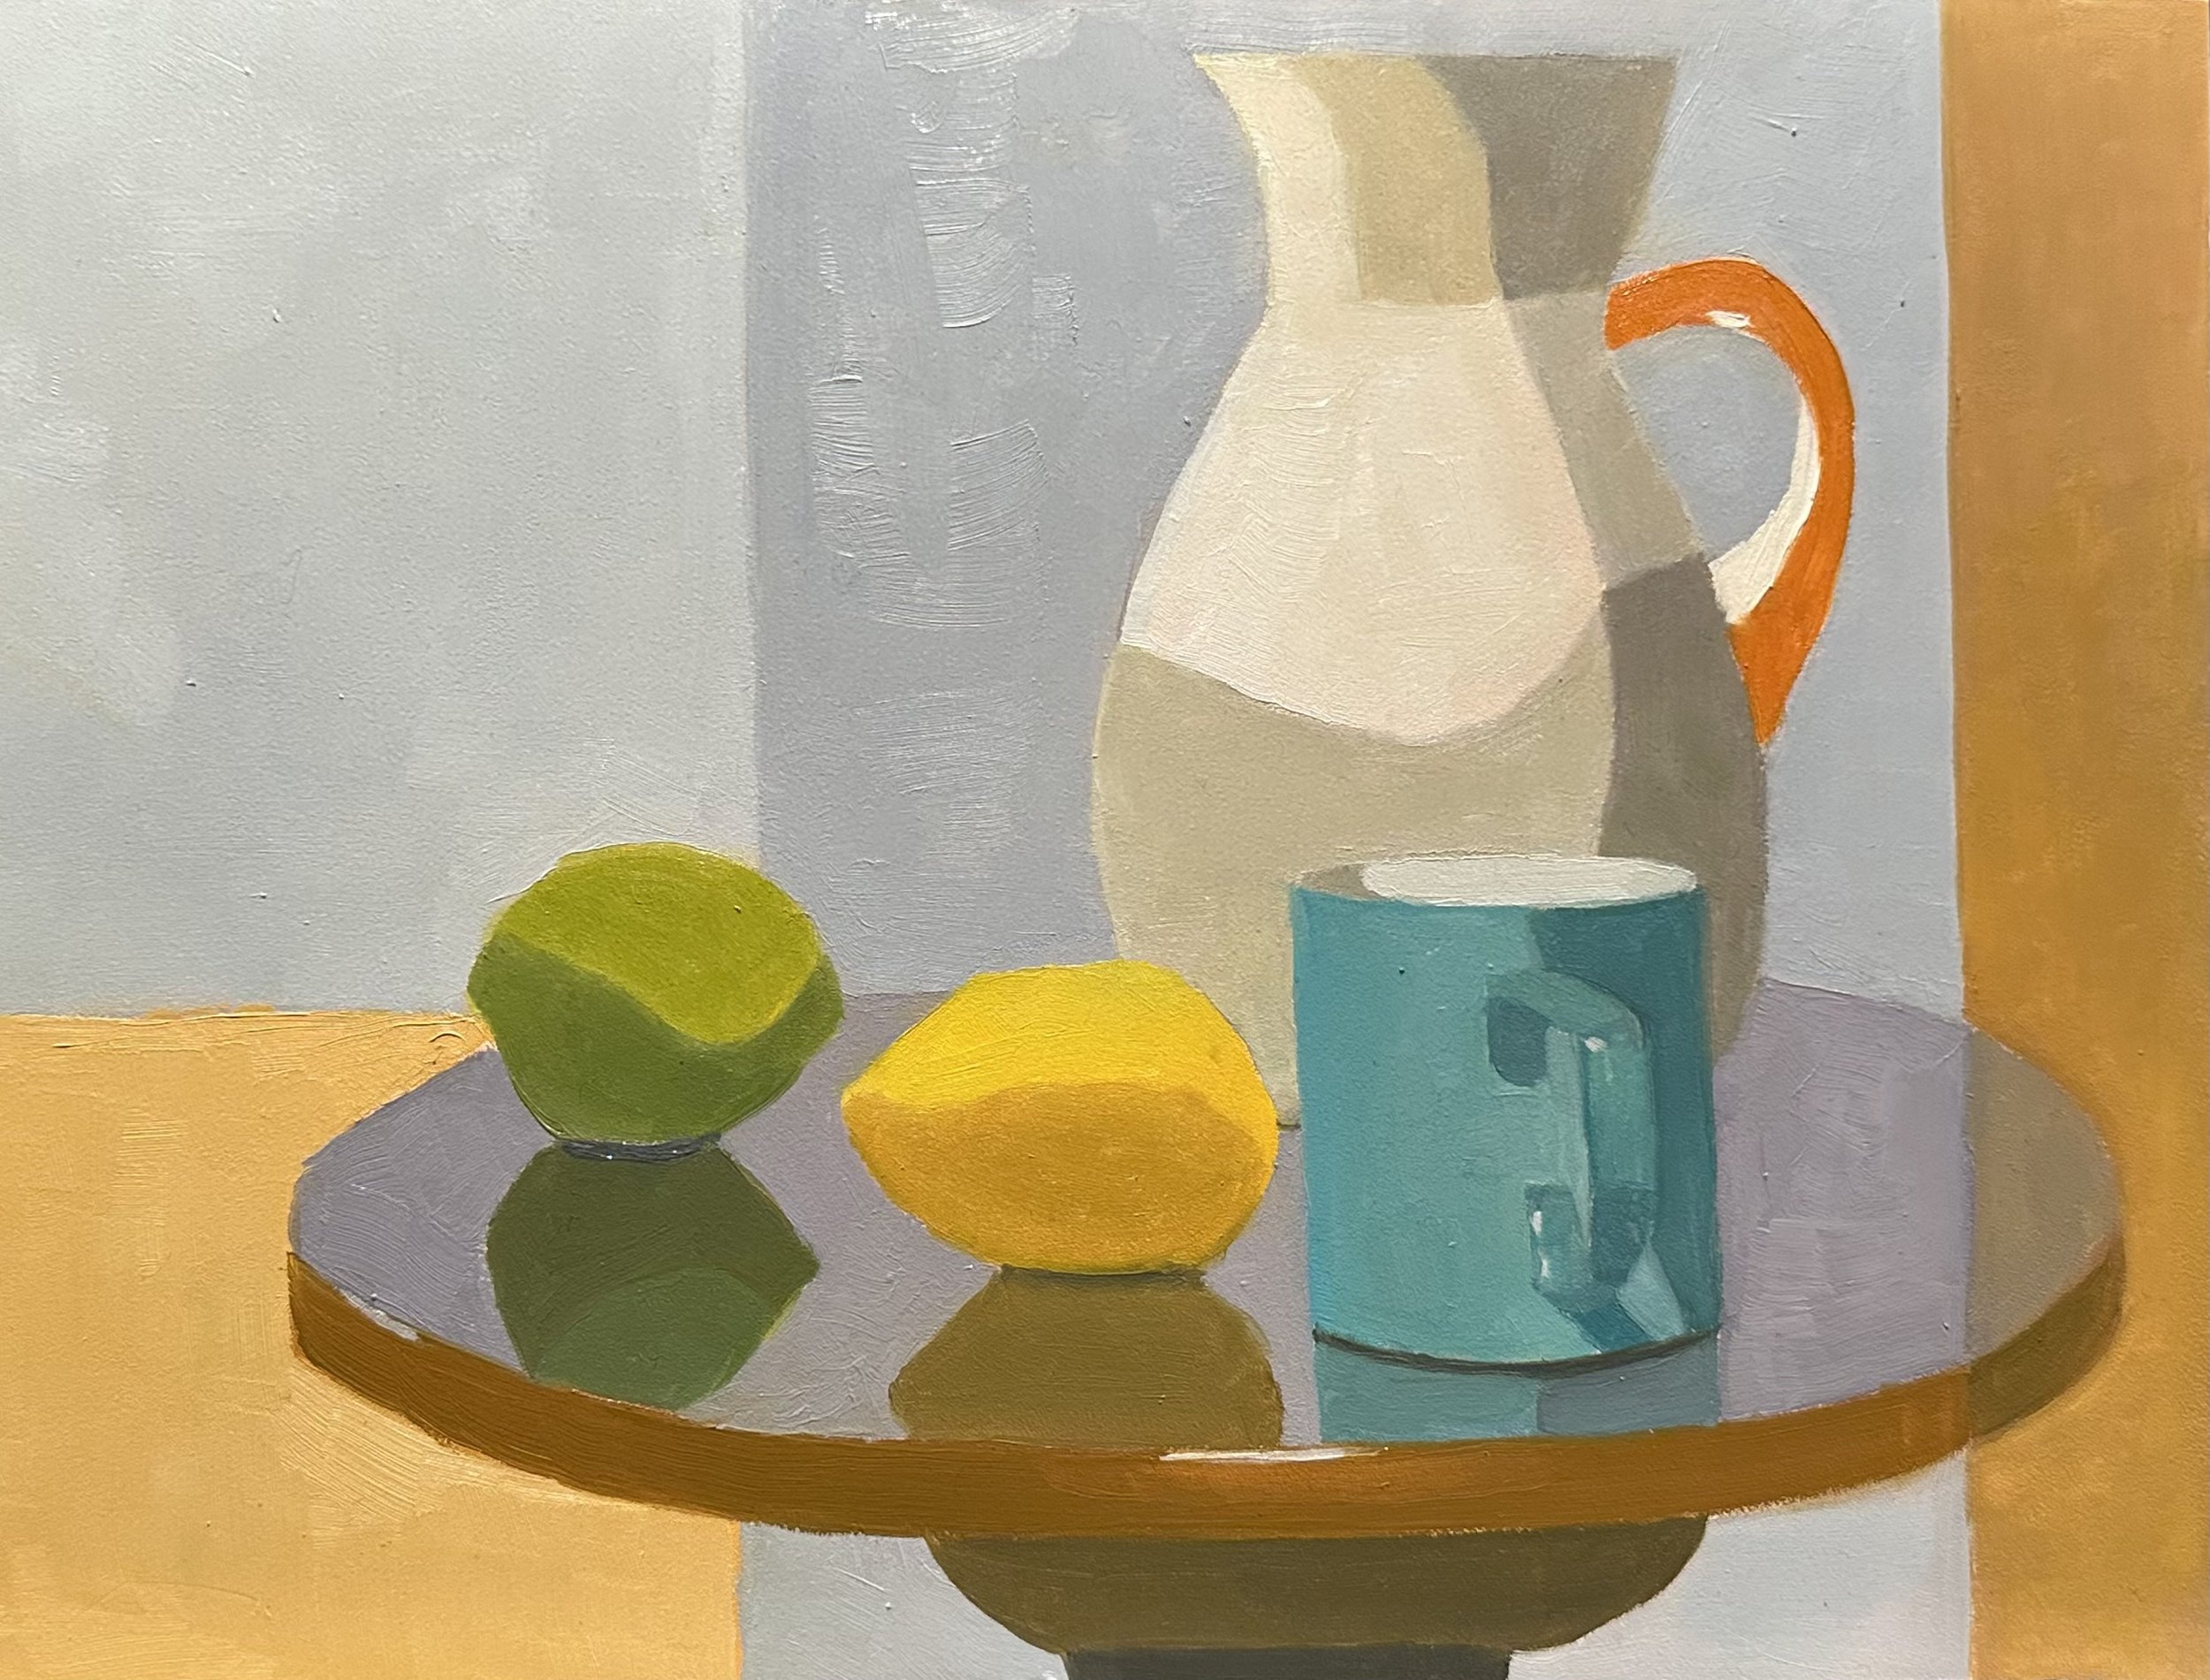 Turquoise Cup Meets Lemon and Lime by Carla Roth